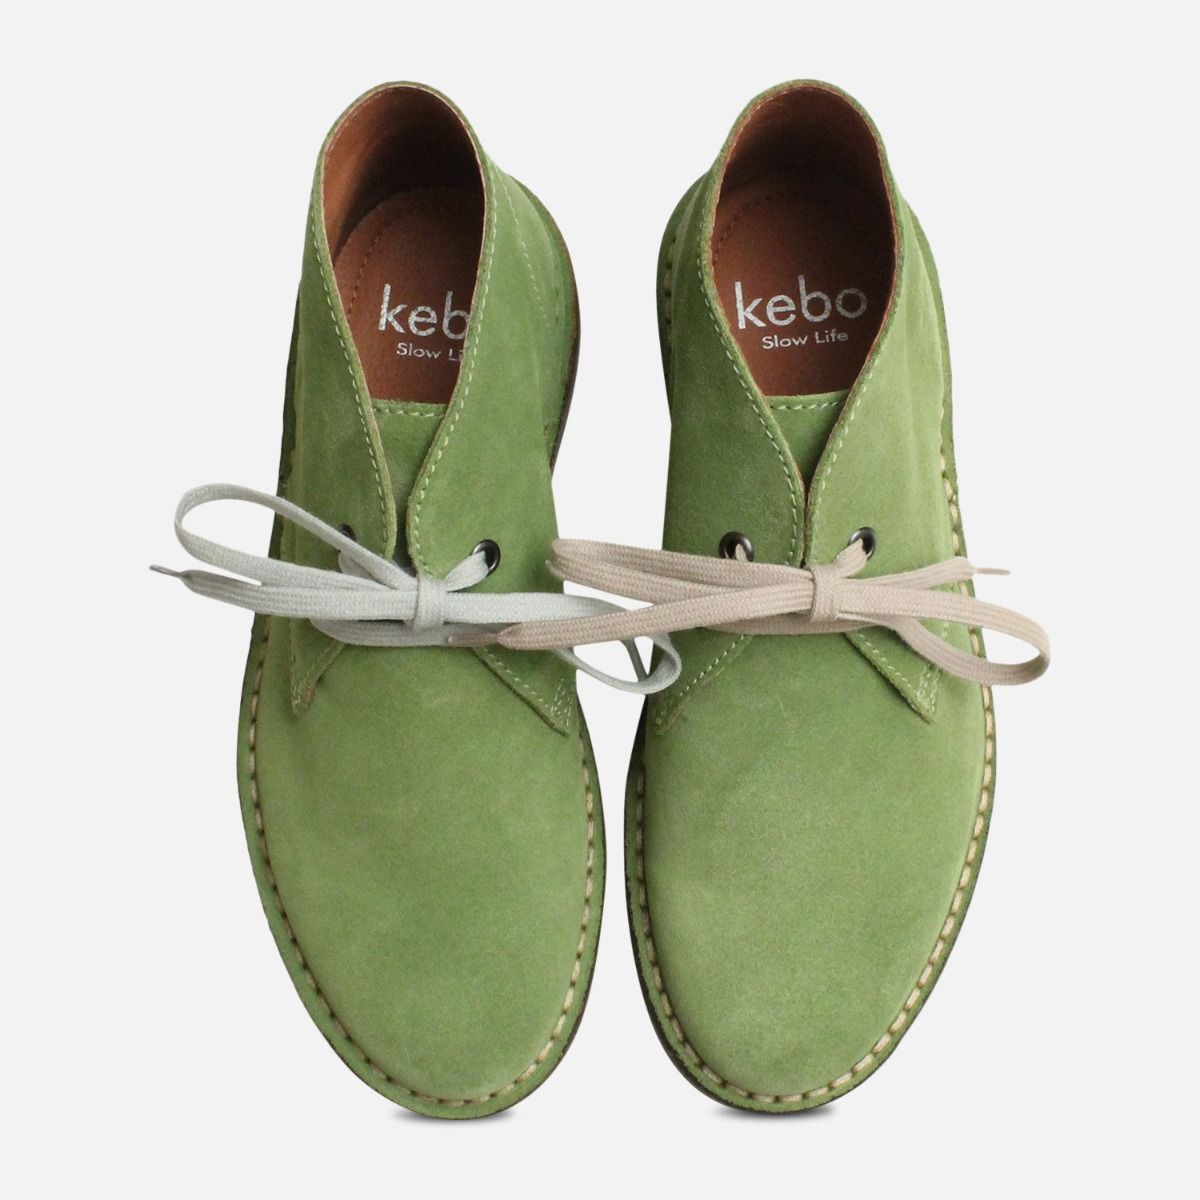 ladies green suede shoes